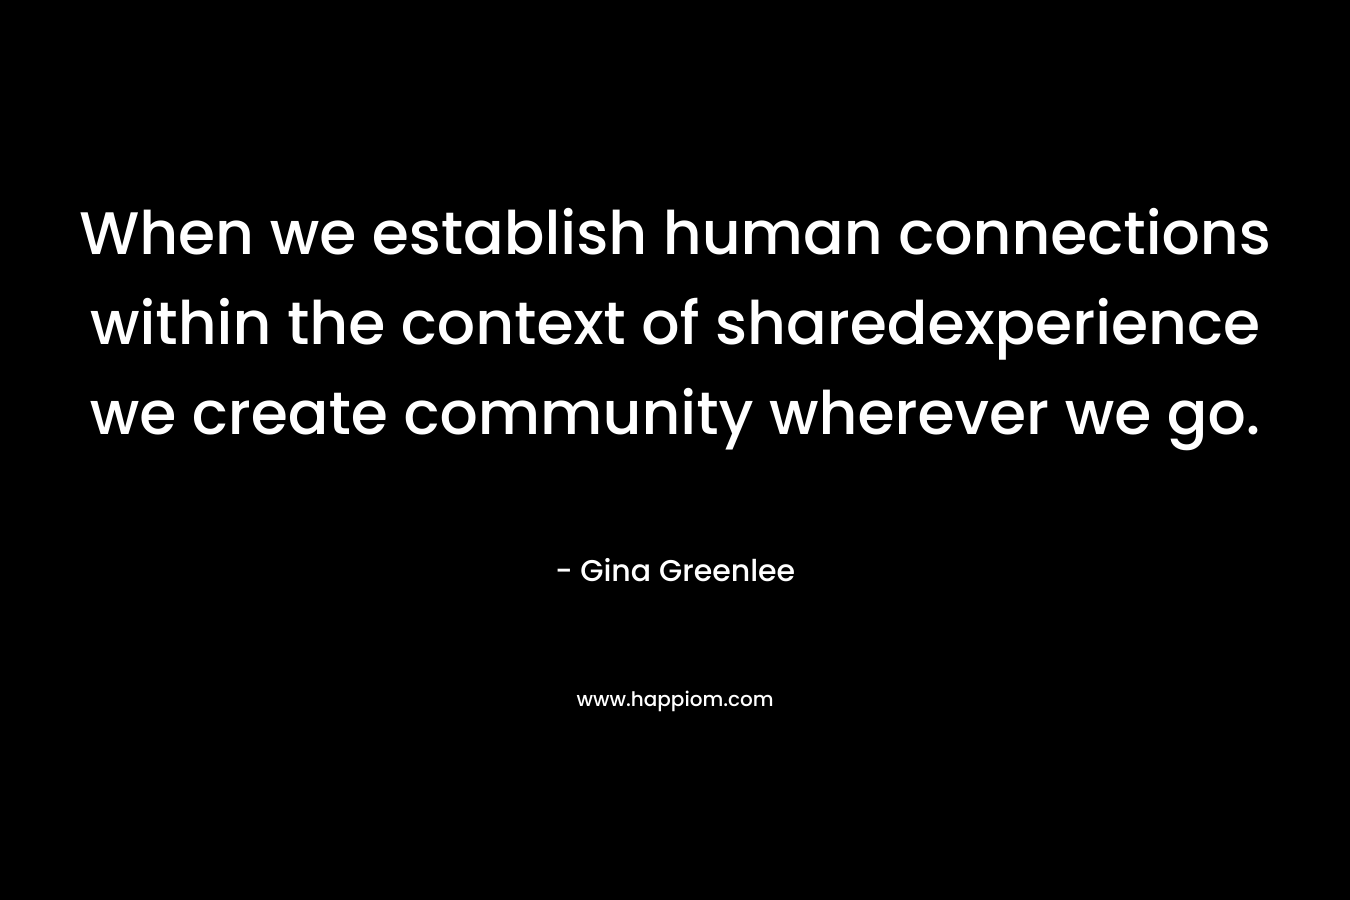 When we establish human connections within the context of sharedexperience we create community wherever we go.